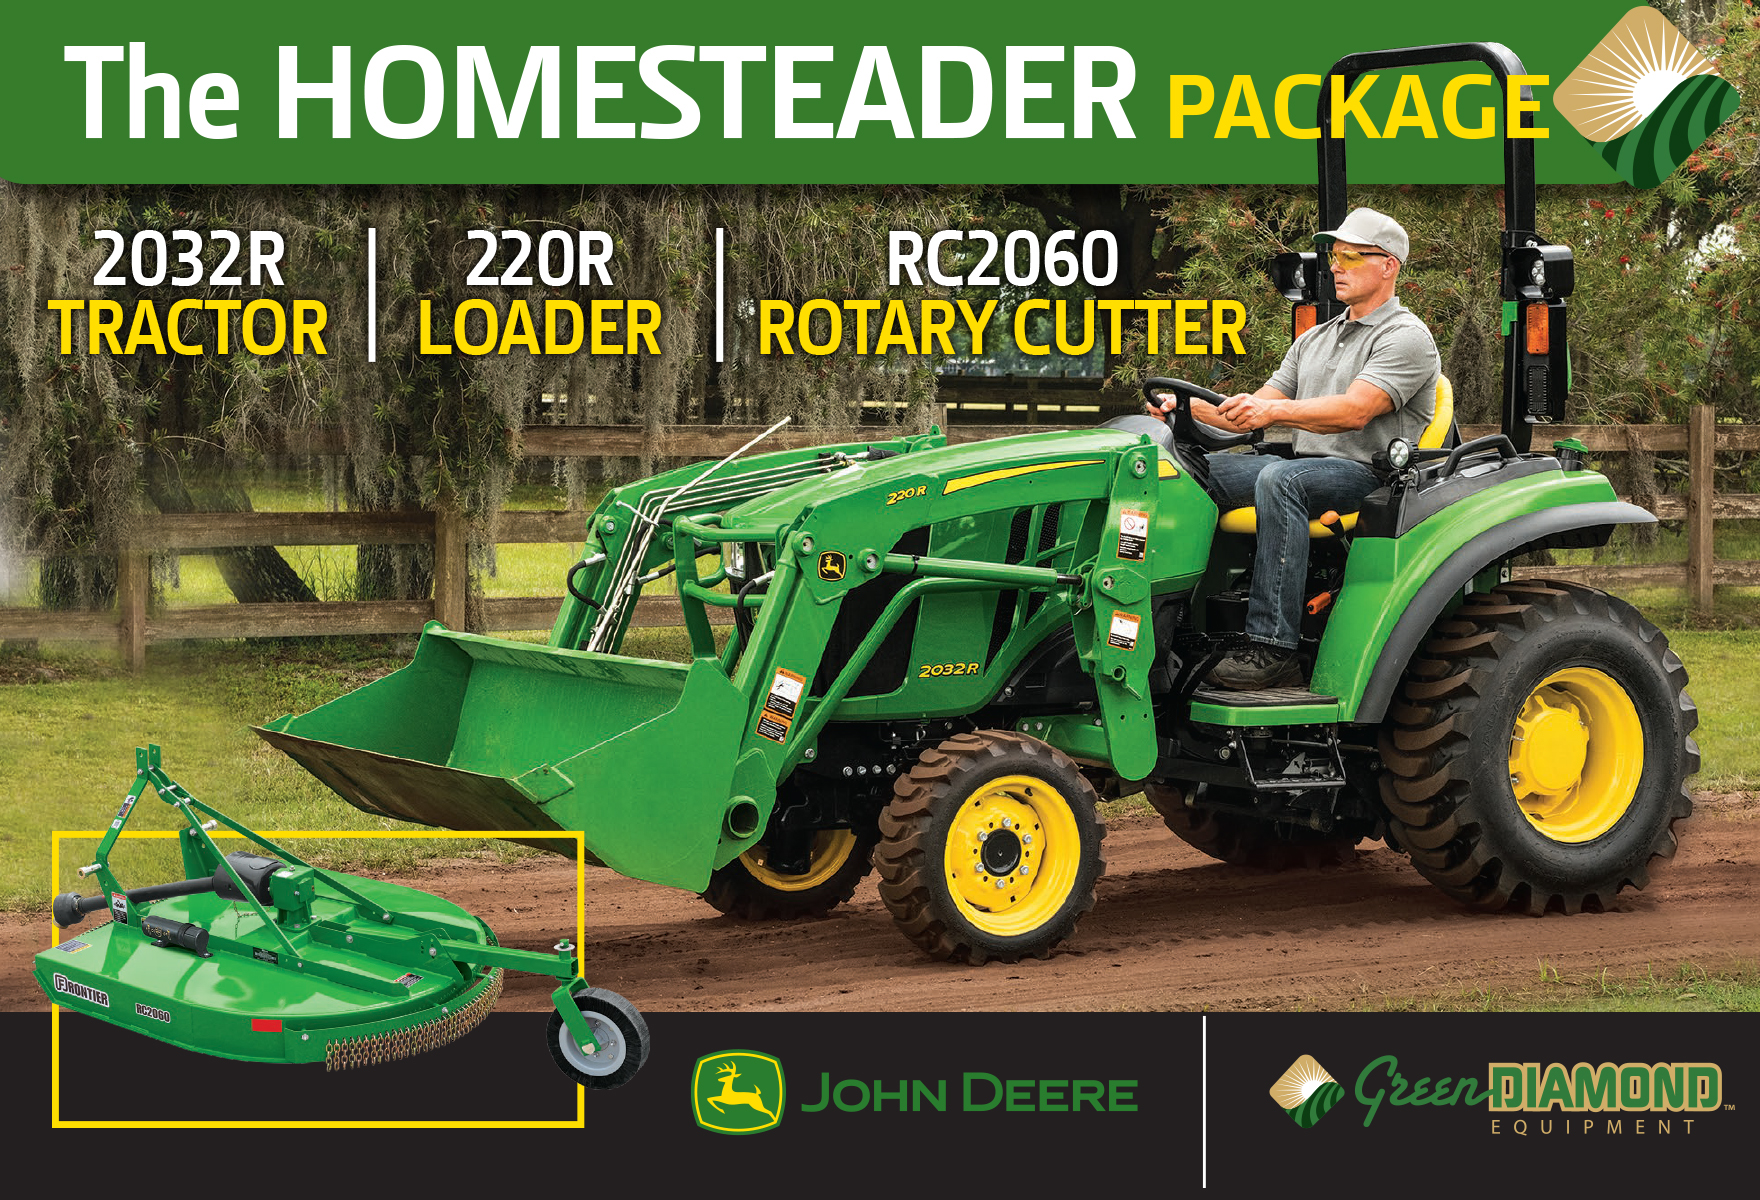 The Homesteader Package